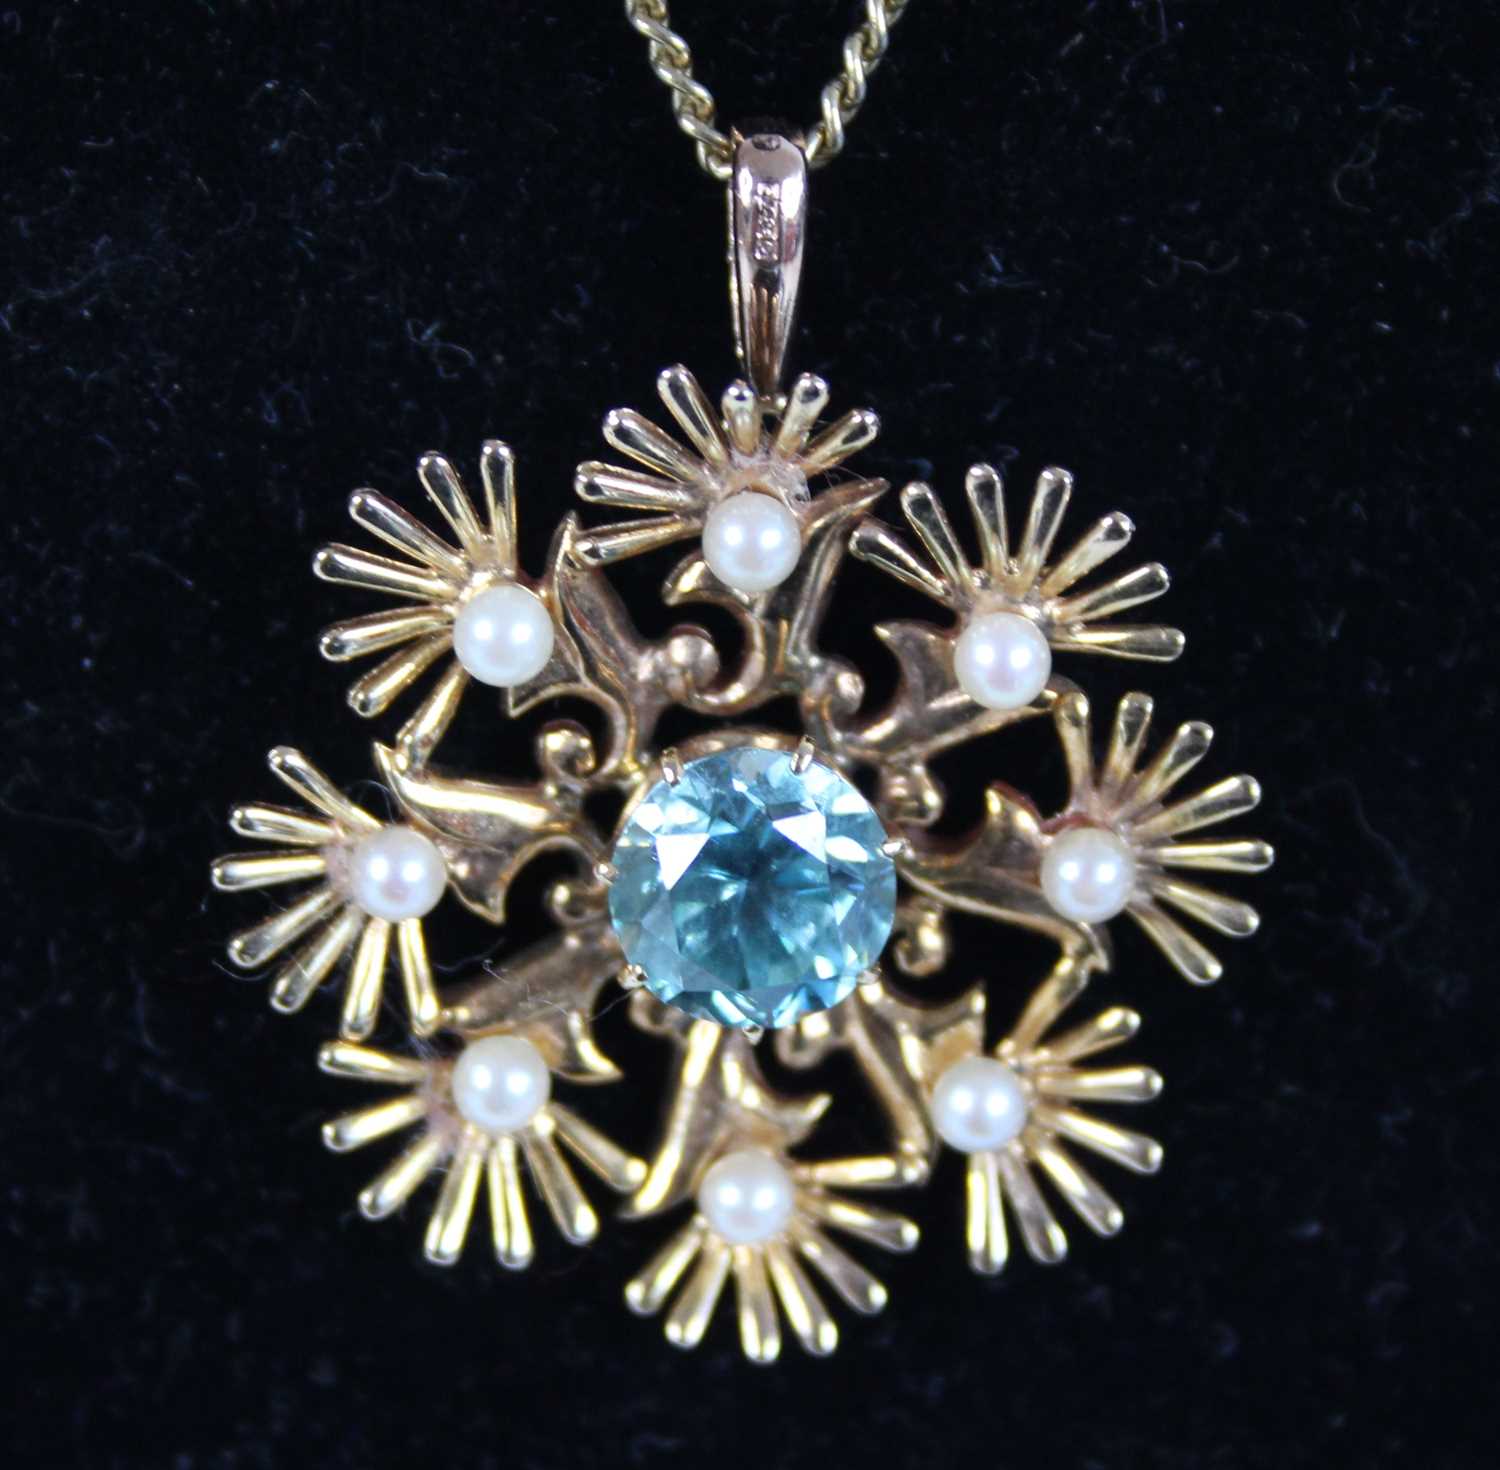 A 9ct yellow gold, zircon and pearl eight-ray star pendant, the centre round zircon measuring approx - Image 2 of 4